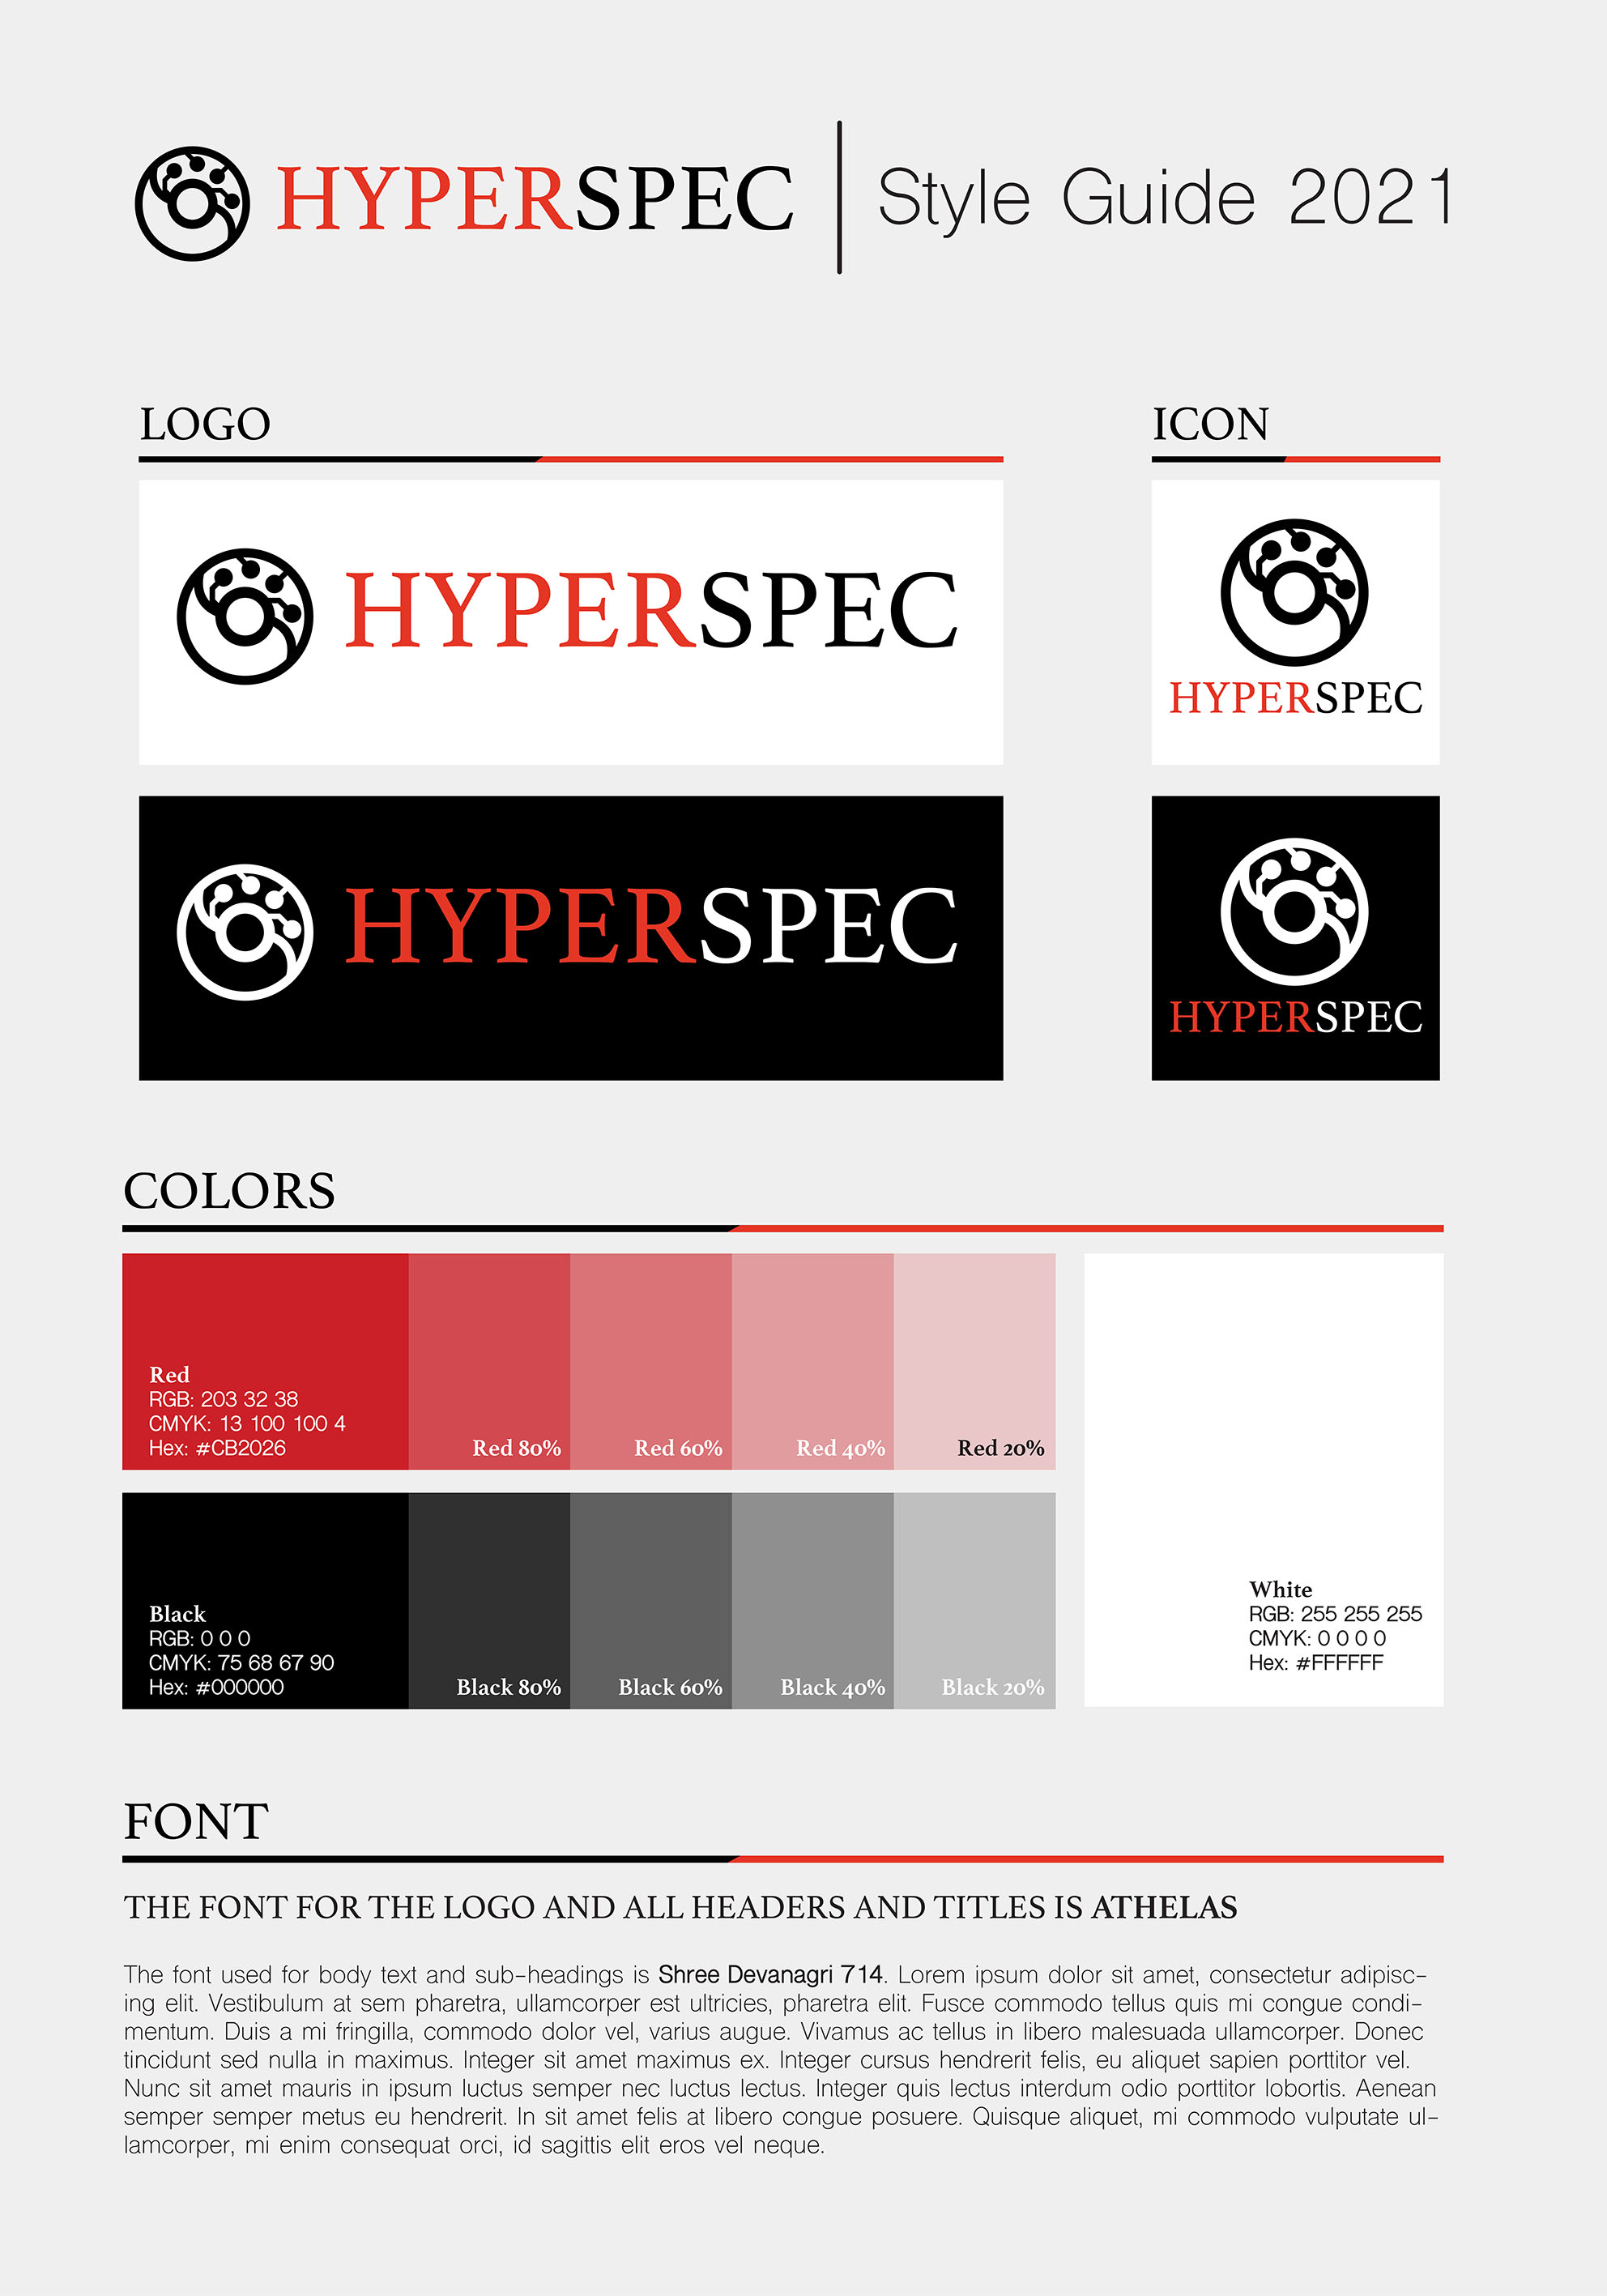 Hyperspec Style Guide